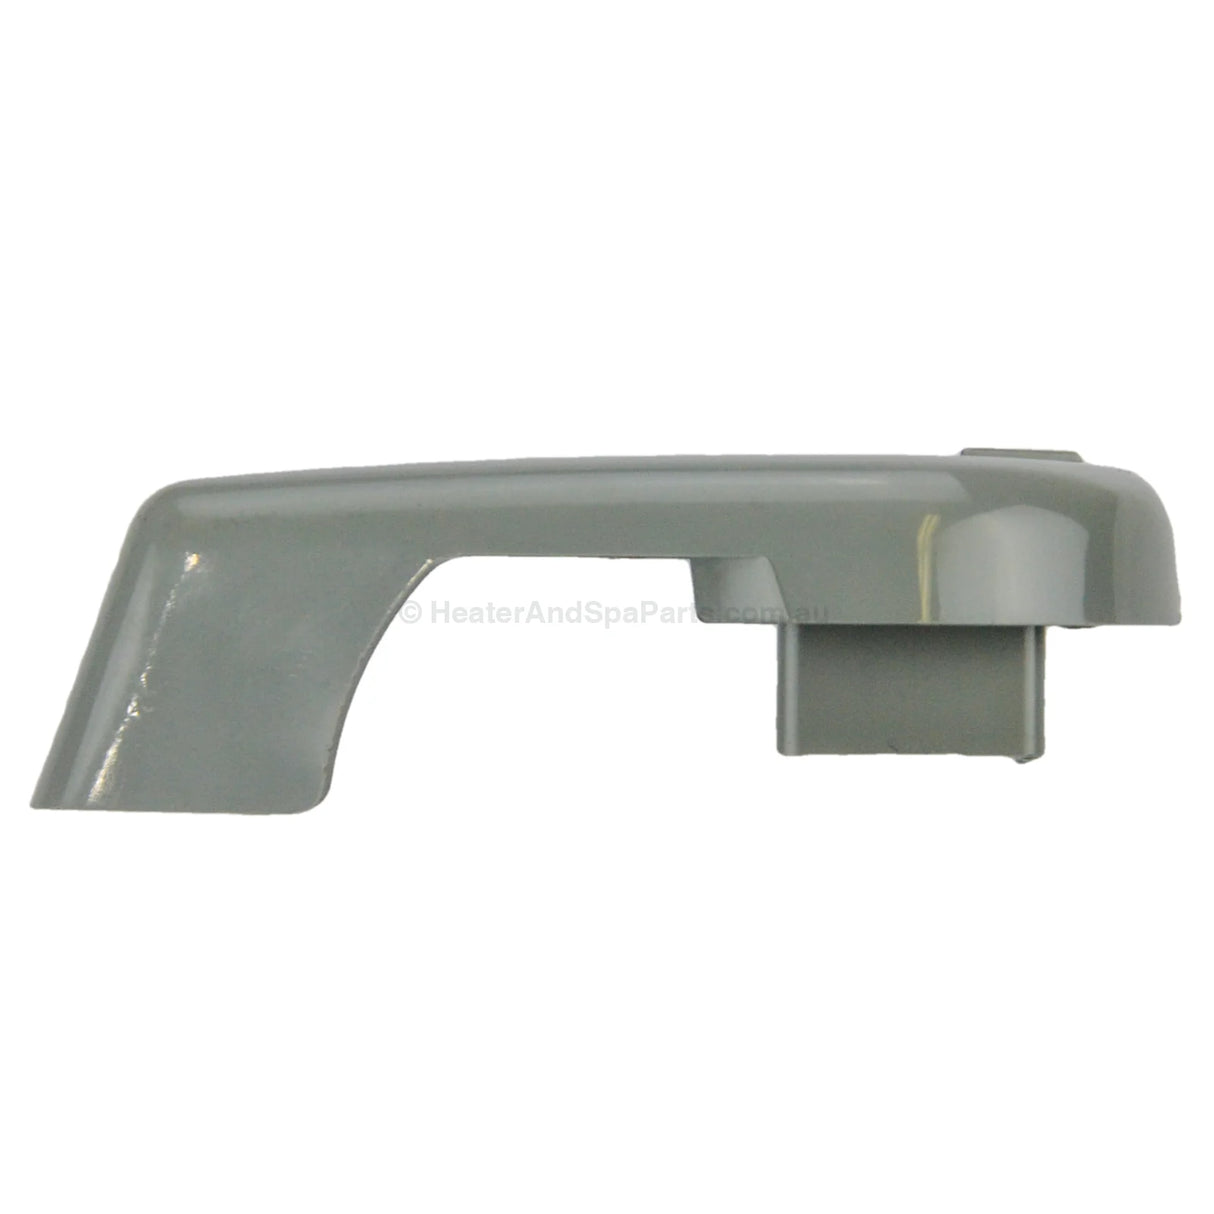 Hydroair 1" Diverter / On/Off Valve Handle - Grey - Heater and Spa Parts